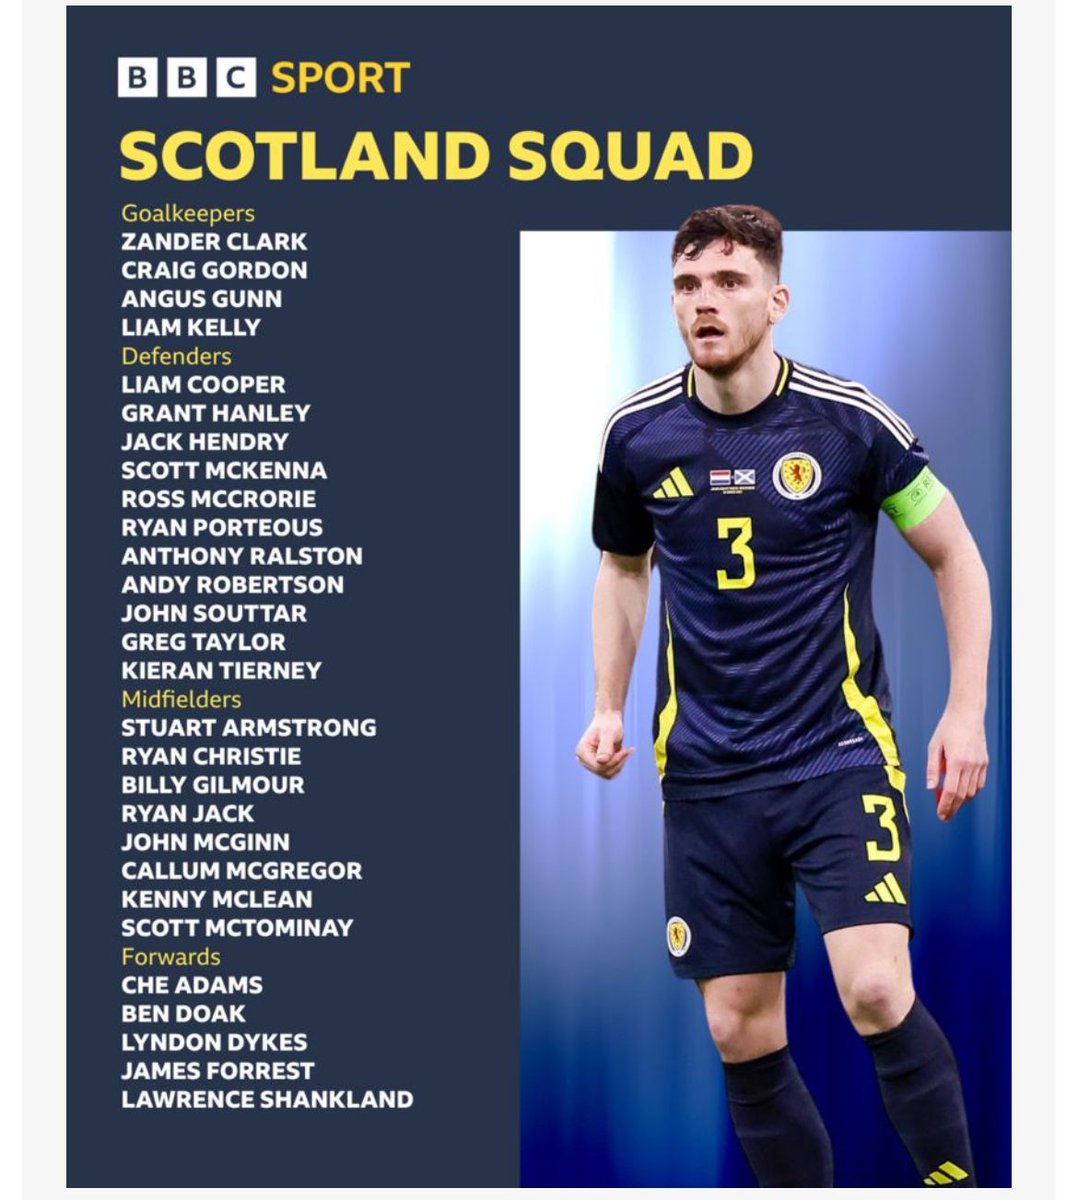 Decent selection. Ben Doak offers the unpredictable and will be relatively unknown. RWB and striker slots up for grabs. Rest of the team picks itself IMO. We'll be comin'. #TartanArmy 🏴󠁧󠁢󠁳󠁣󠁴󠁿